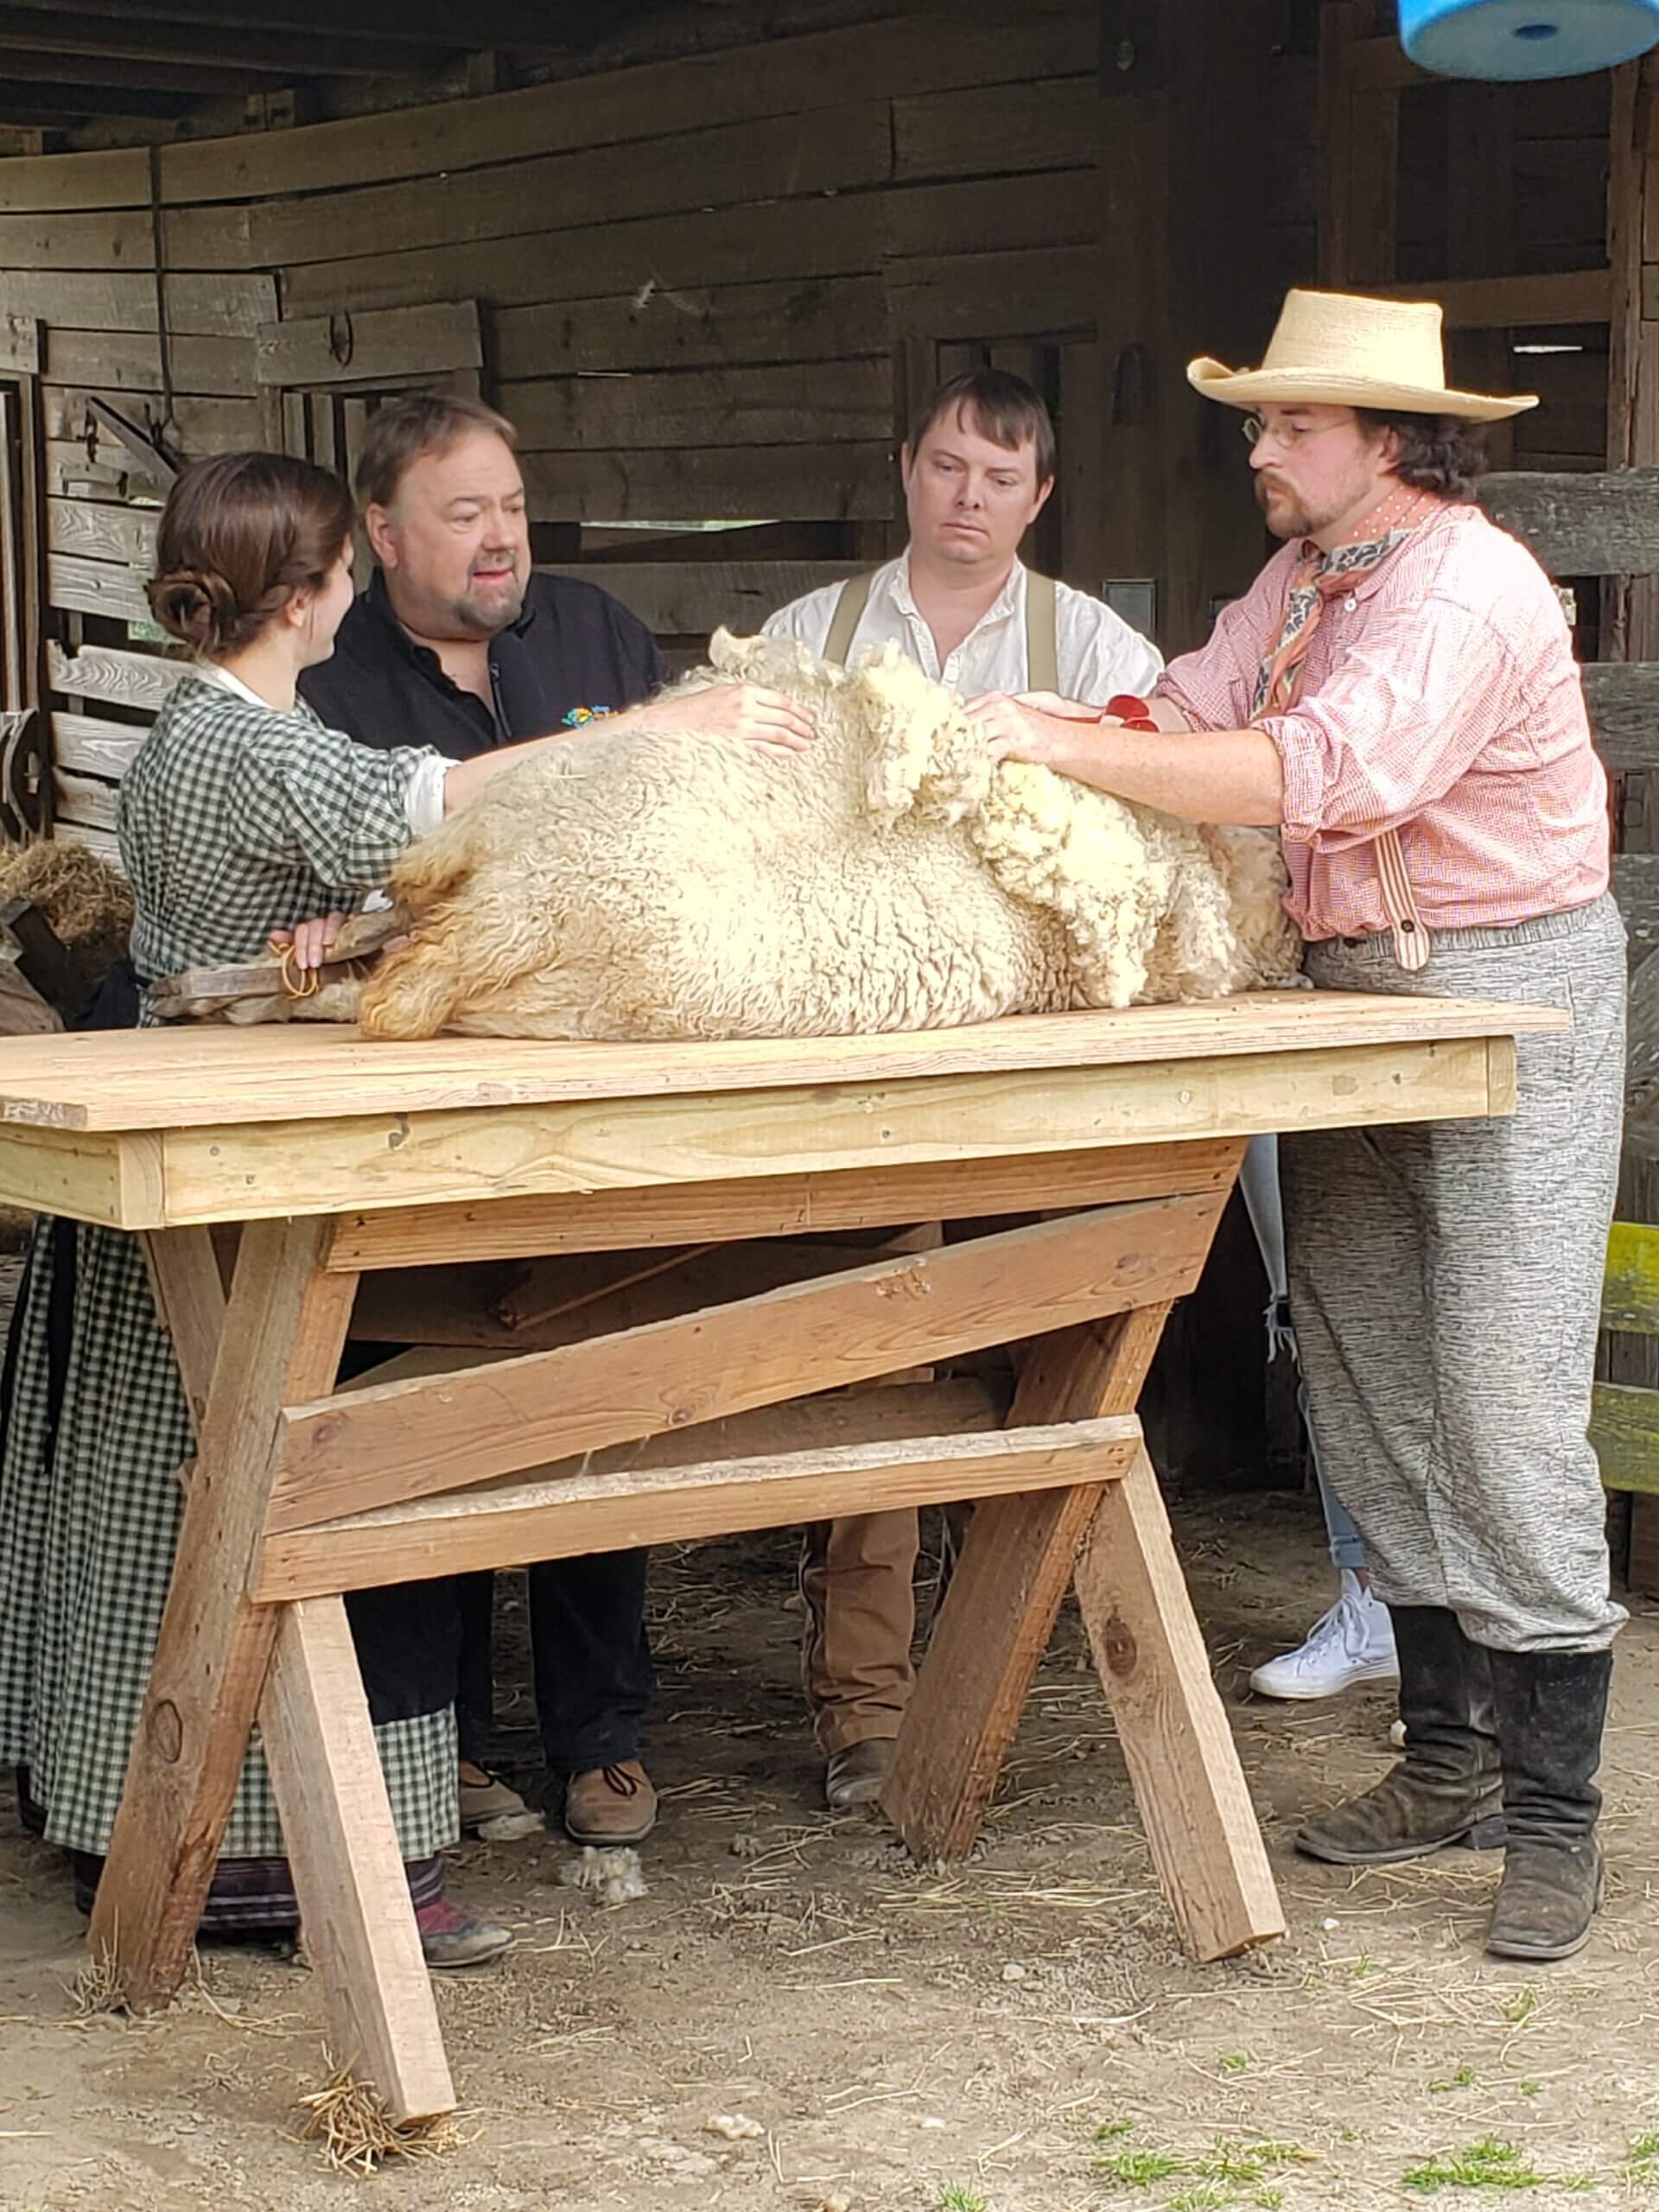 Chip learning to shear a sheep. 